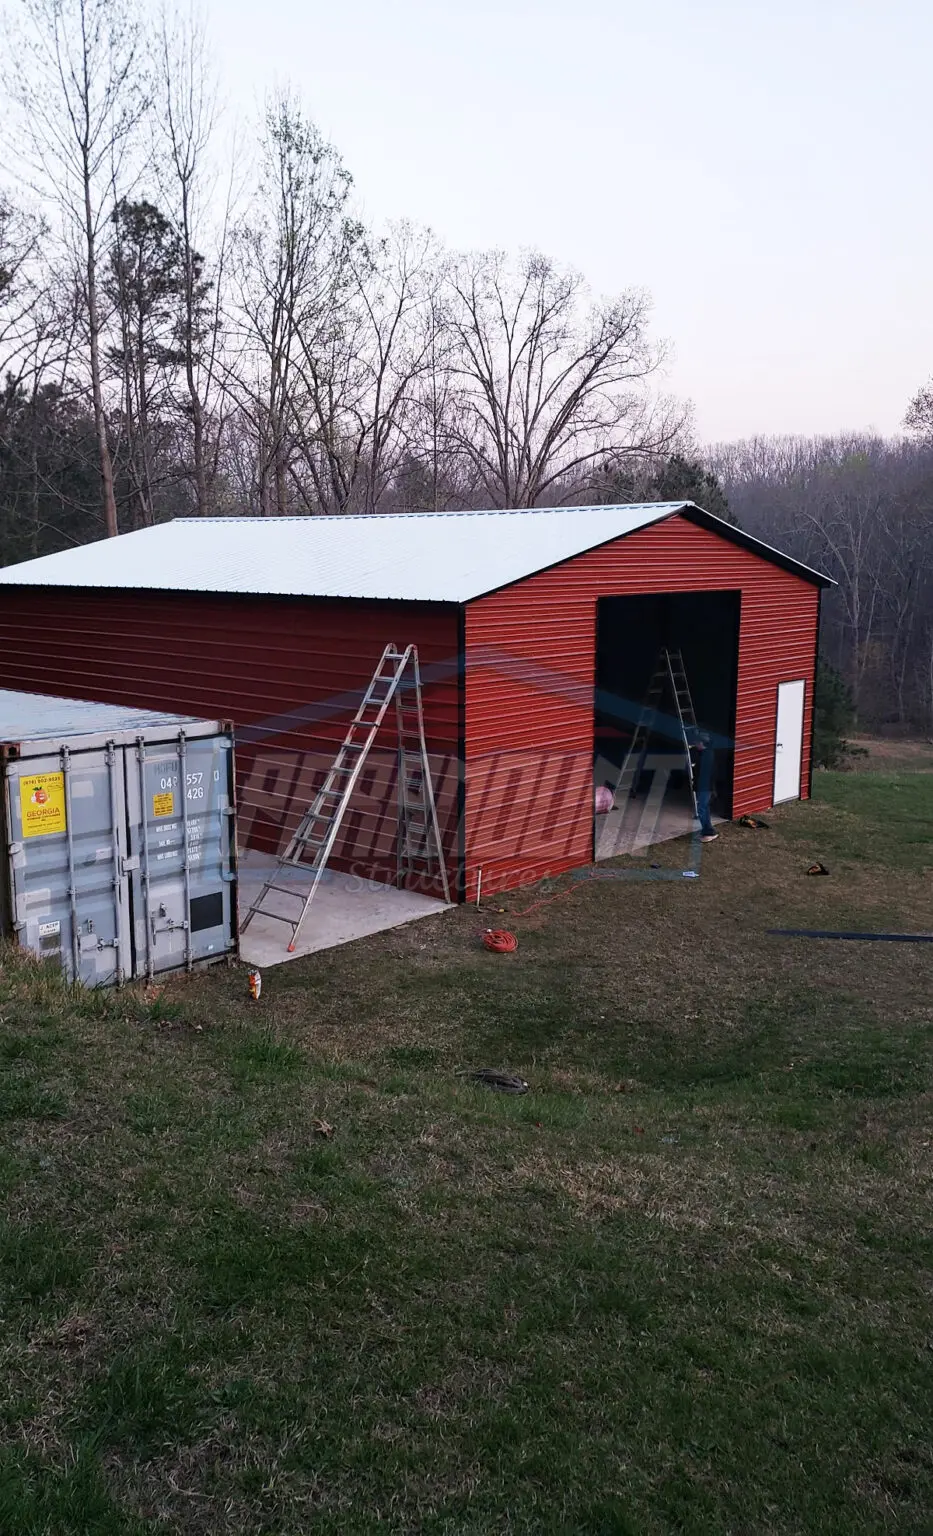 Red metal barn with white trim and open garage door.